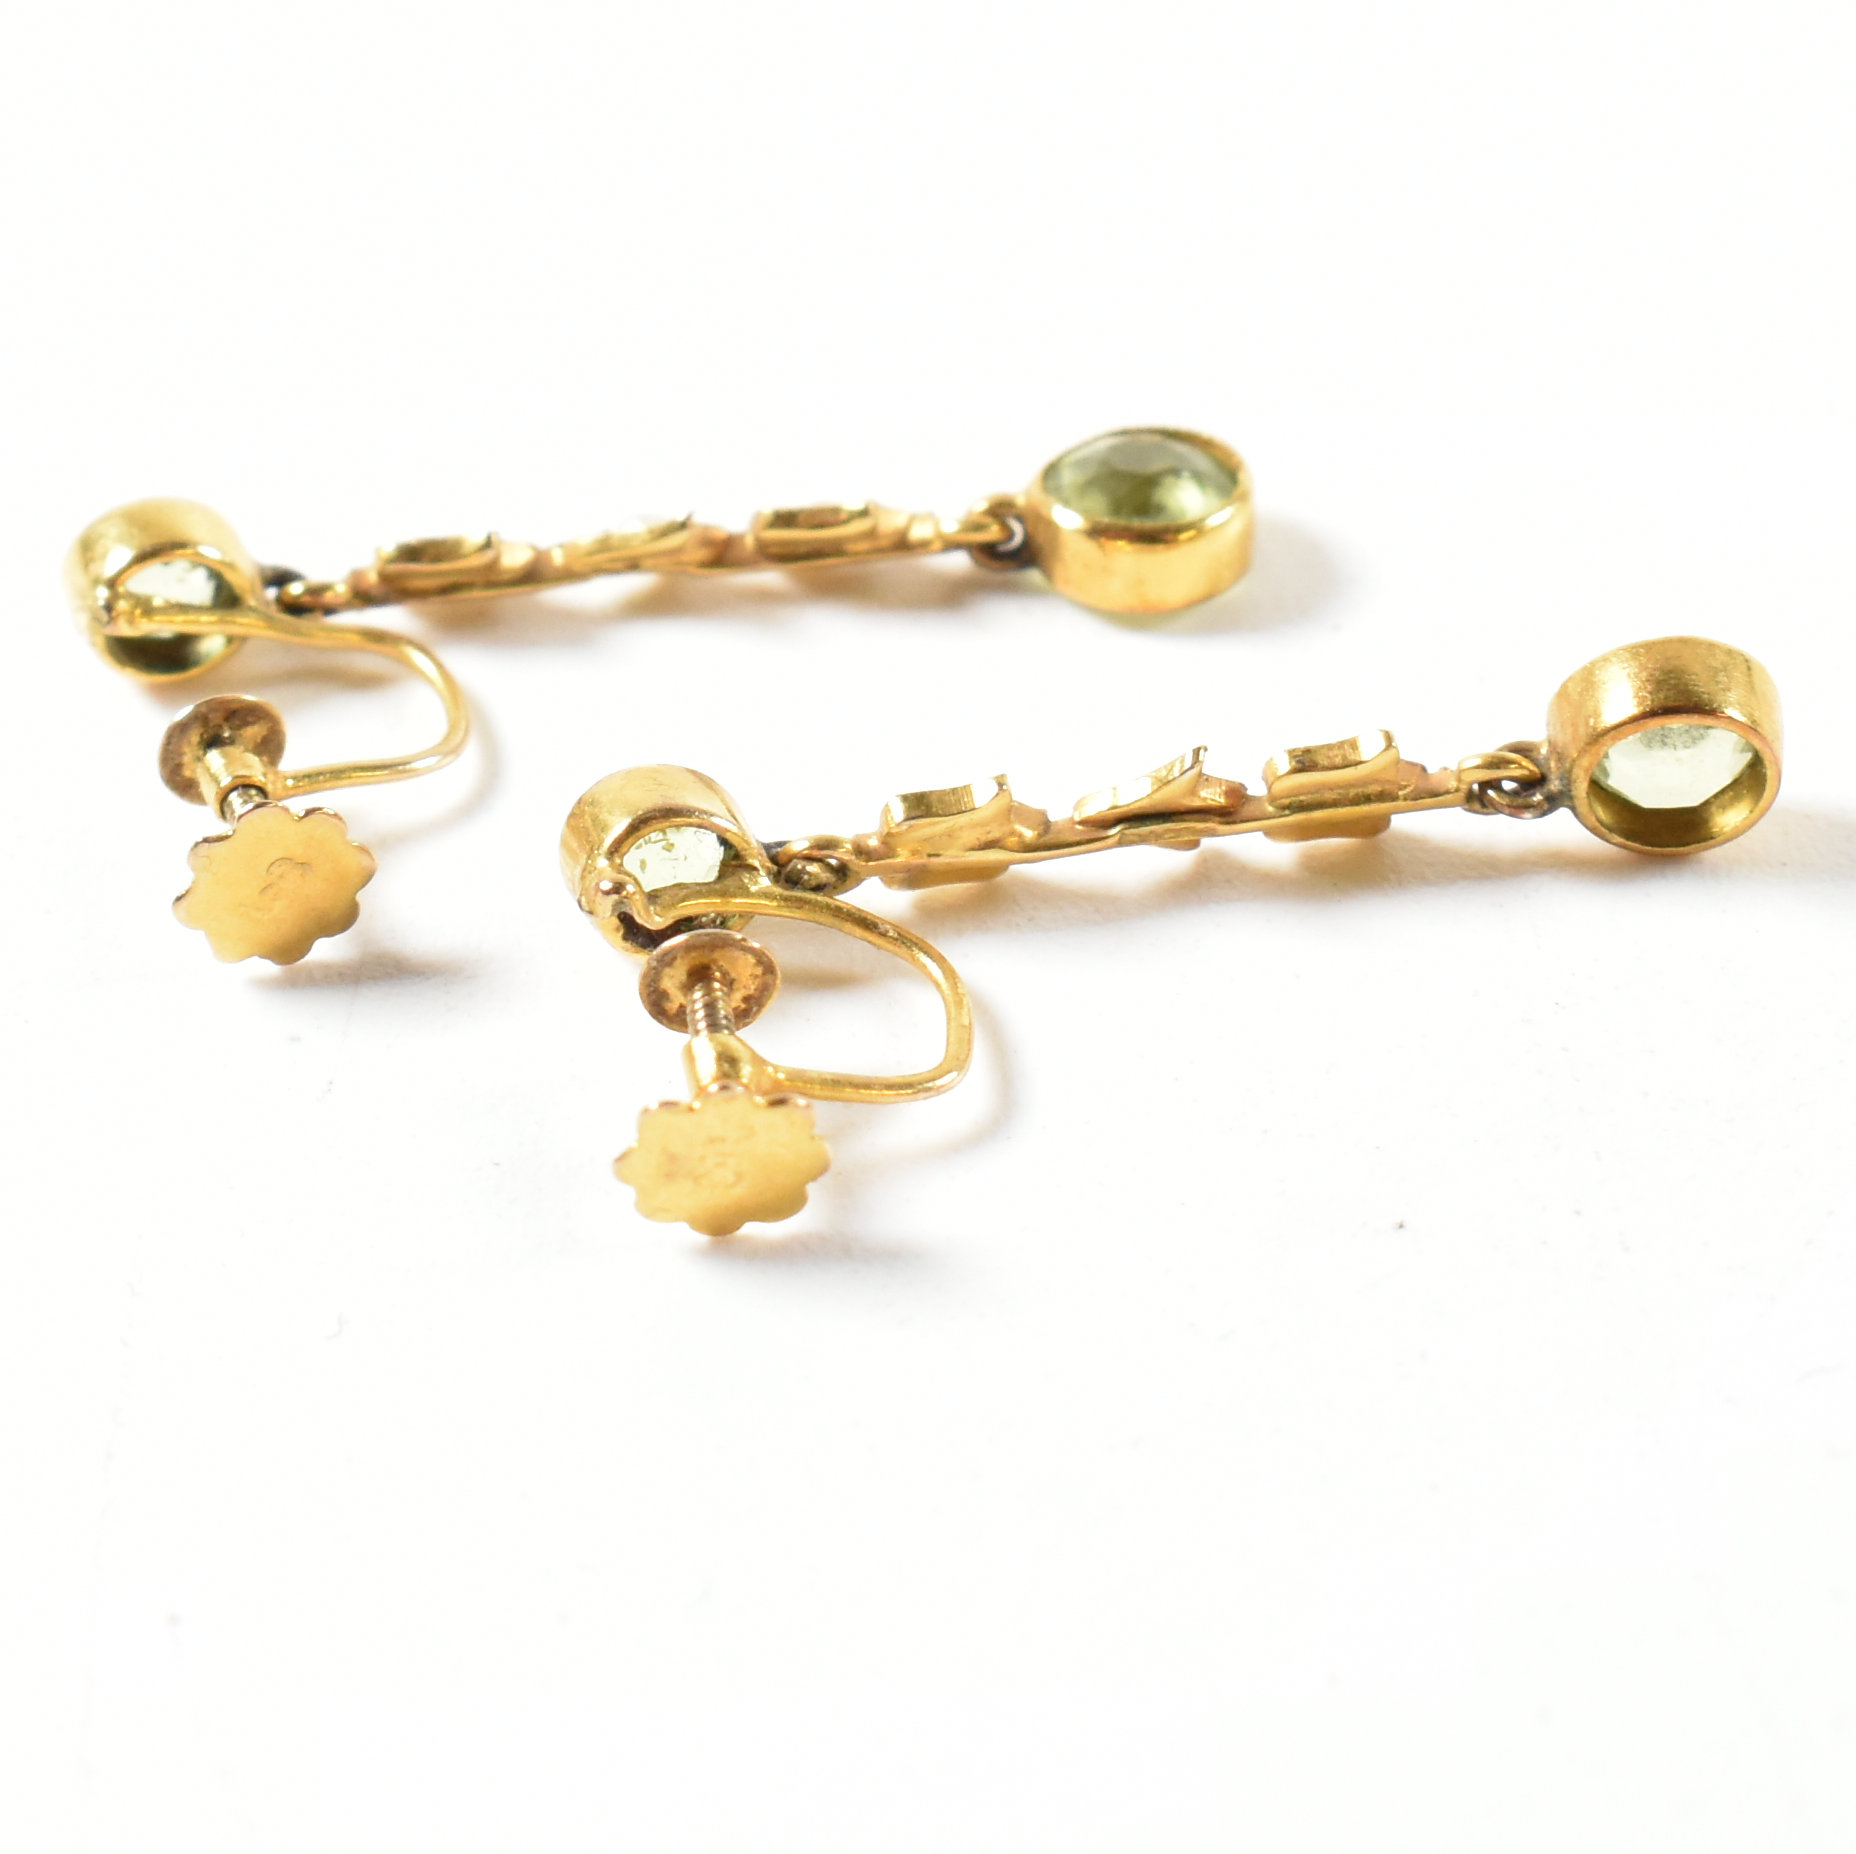 EDWARDIAN 9CT GOLD PERIDOT & PEARL NECKLACE & EARRING SUITE - Image 5 of 5